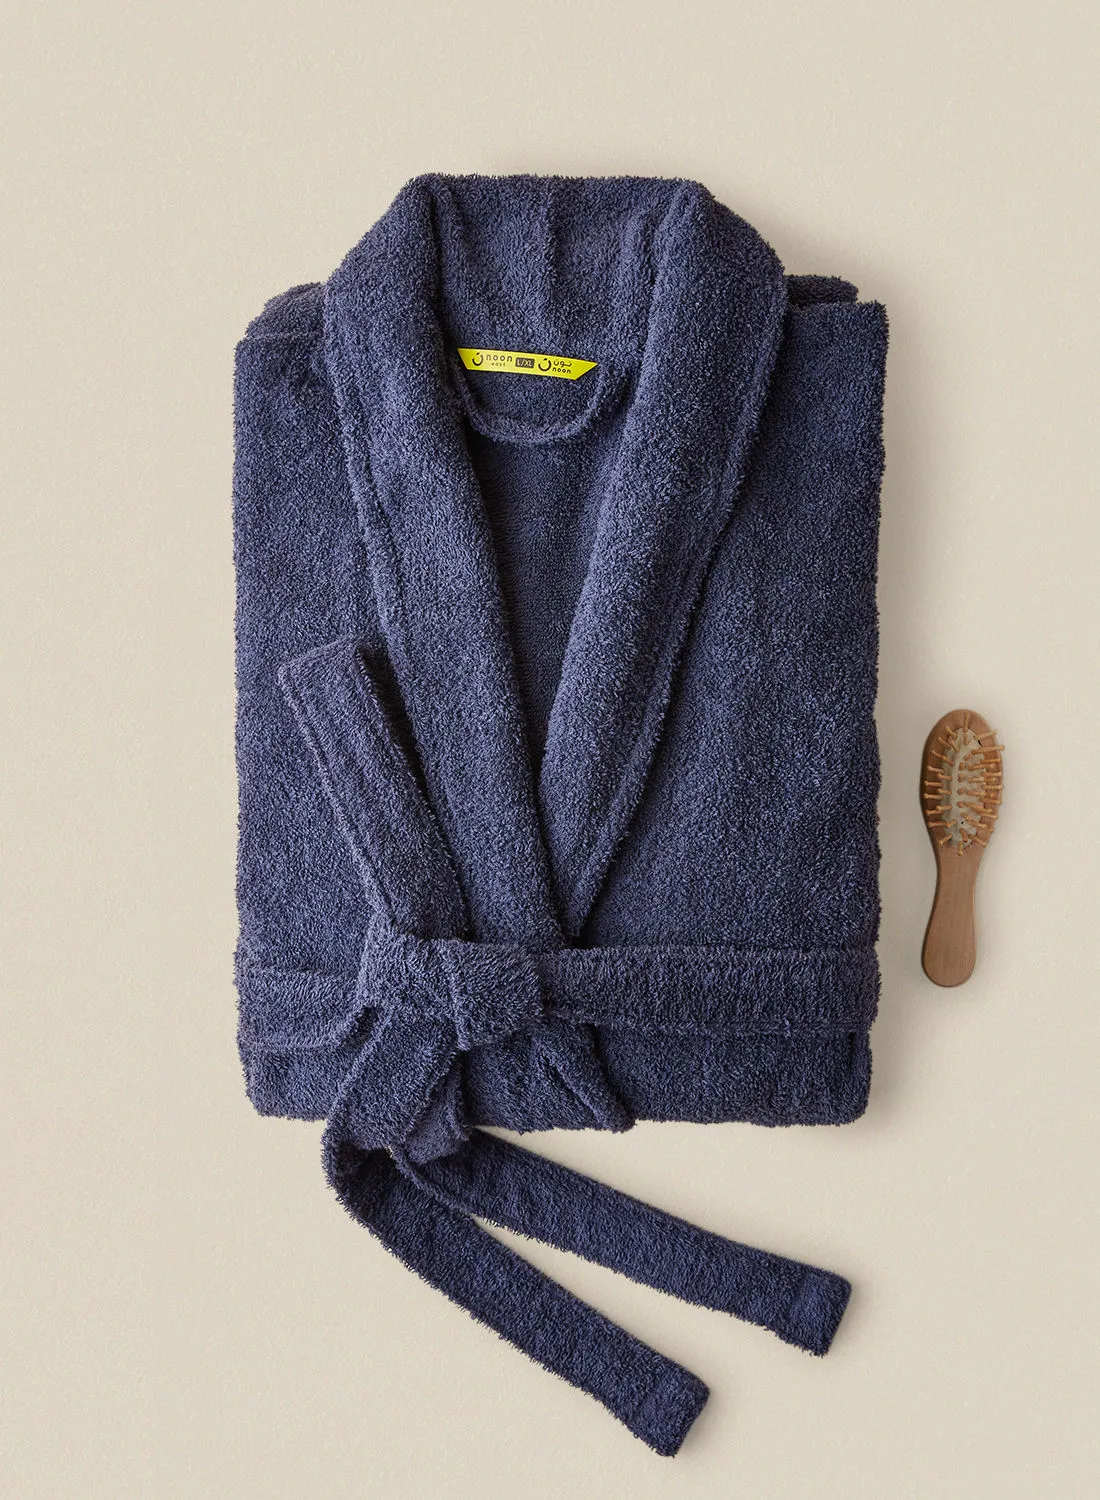 noon east Bathrobe - 380 GSM 100% Cotton Terry Silky Soft Spa Quality Comfort - Shawl Collar & Pocket - Blue Color - 1 Piece